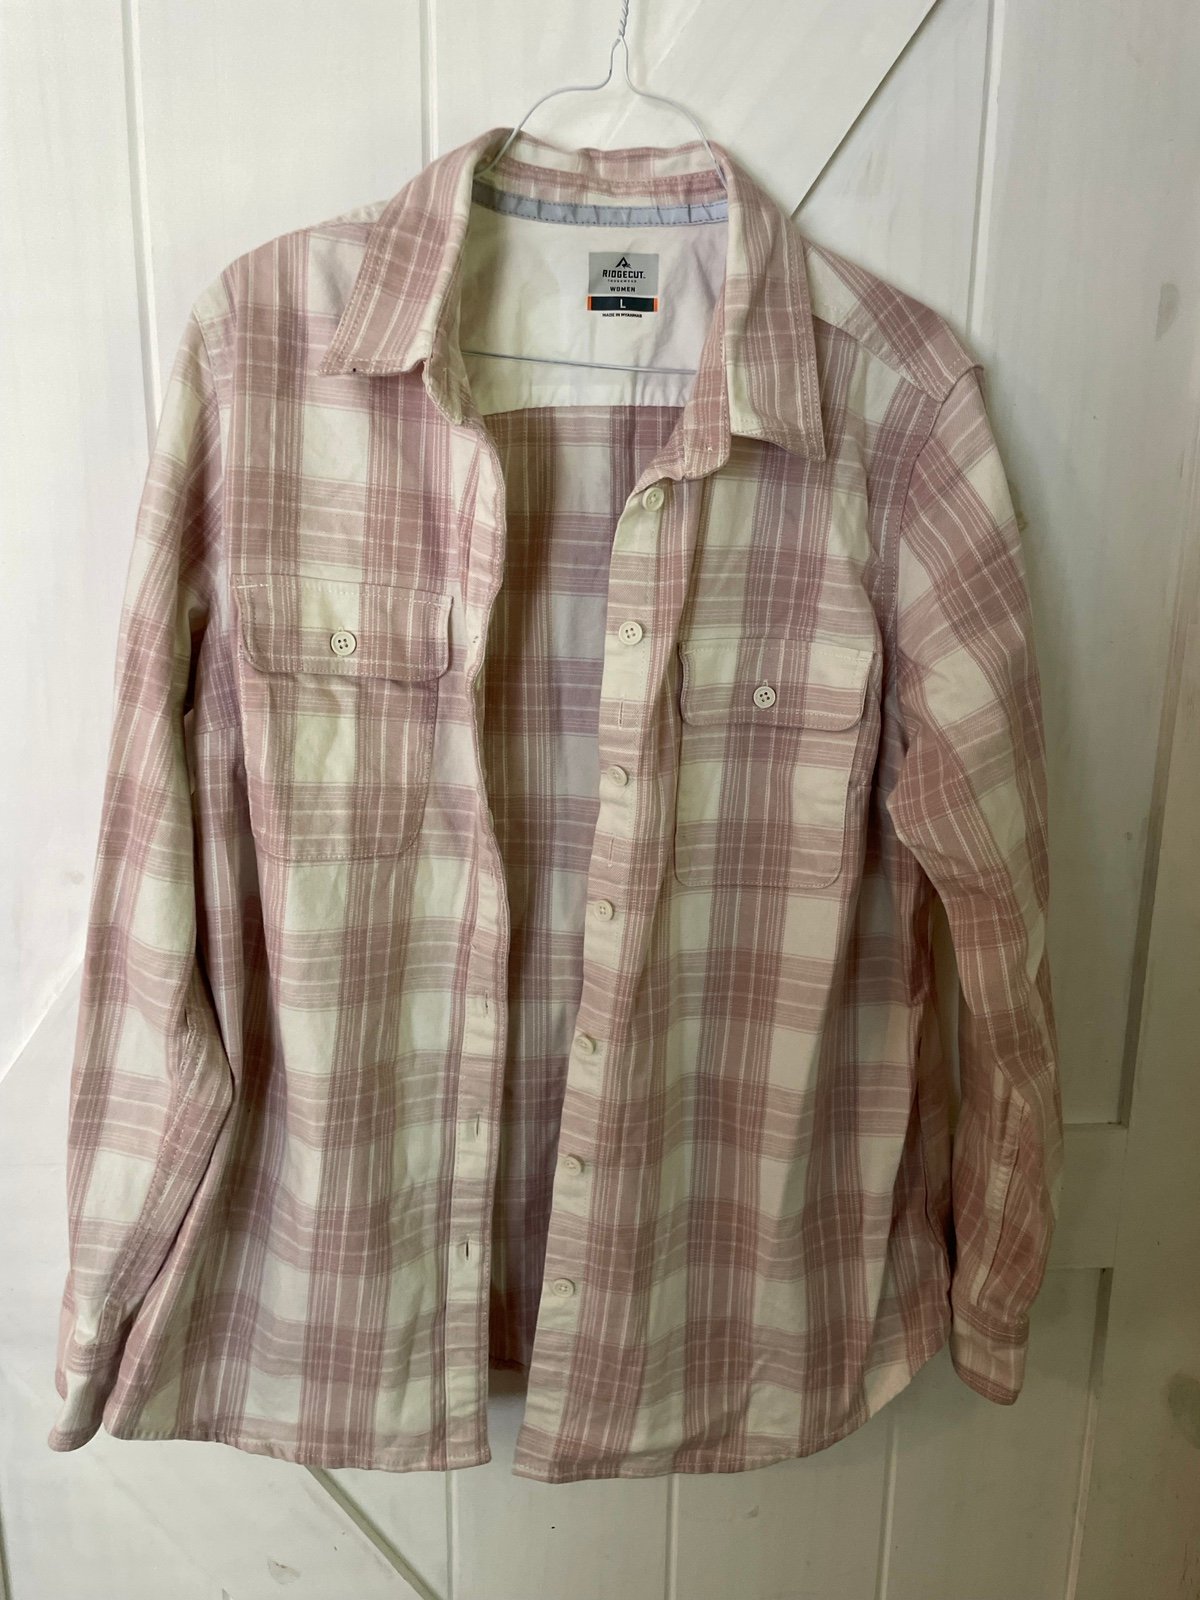 save up to 70% Ridgecut, woman, Large, button down. Fal